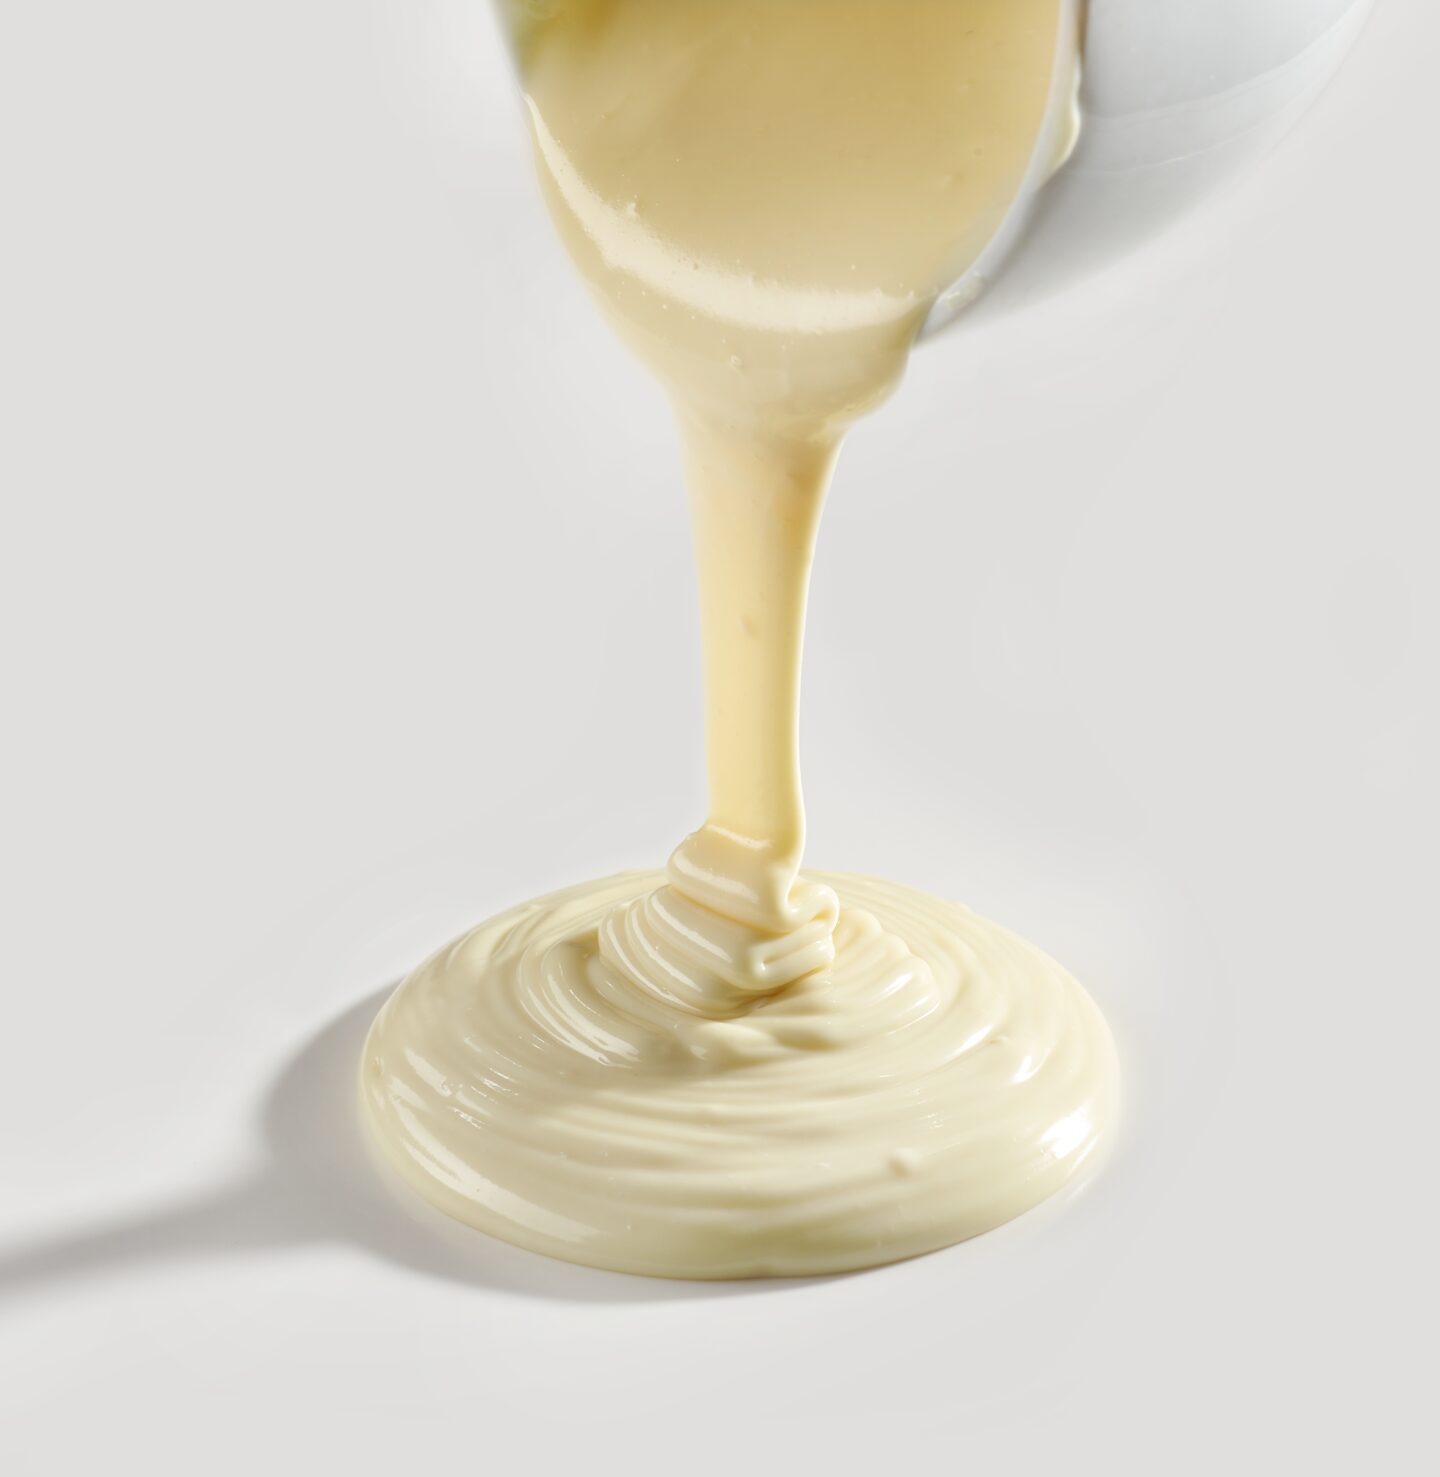 white-chocolate-sauce-being-poured-from-container